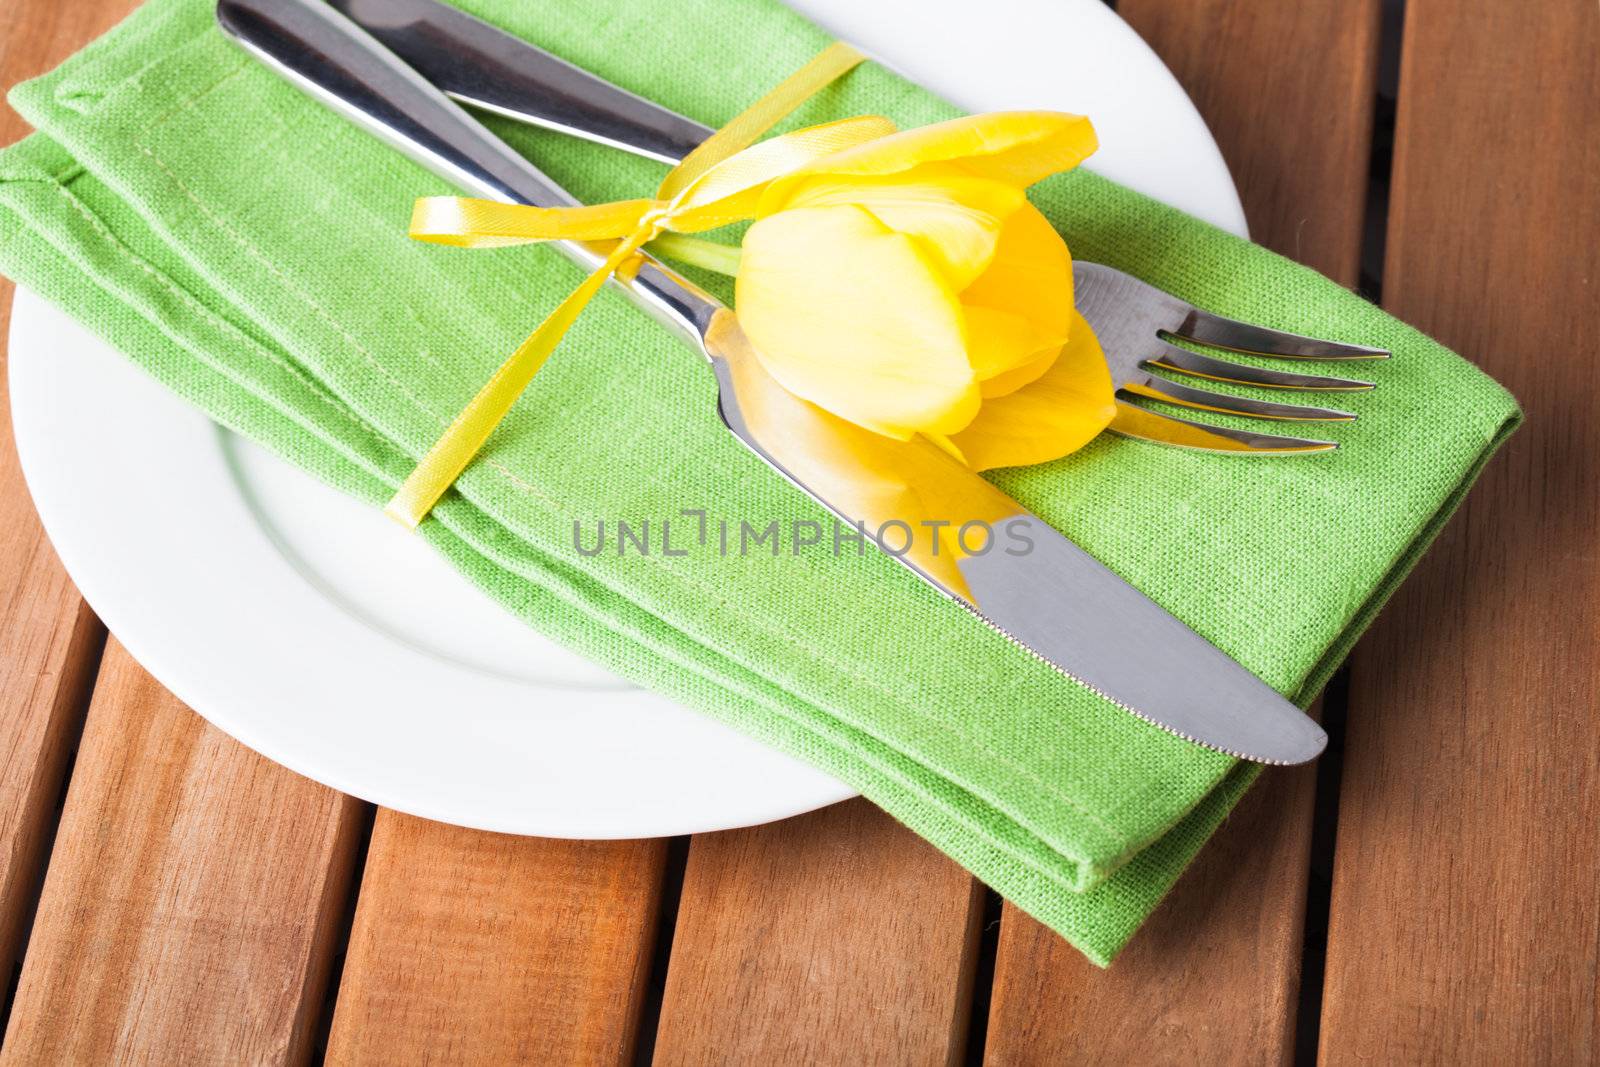 Fork and knife and plate, served for dinner